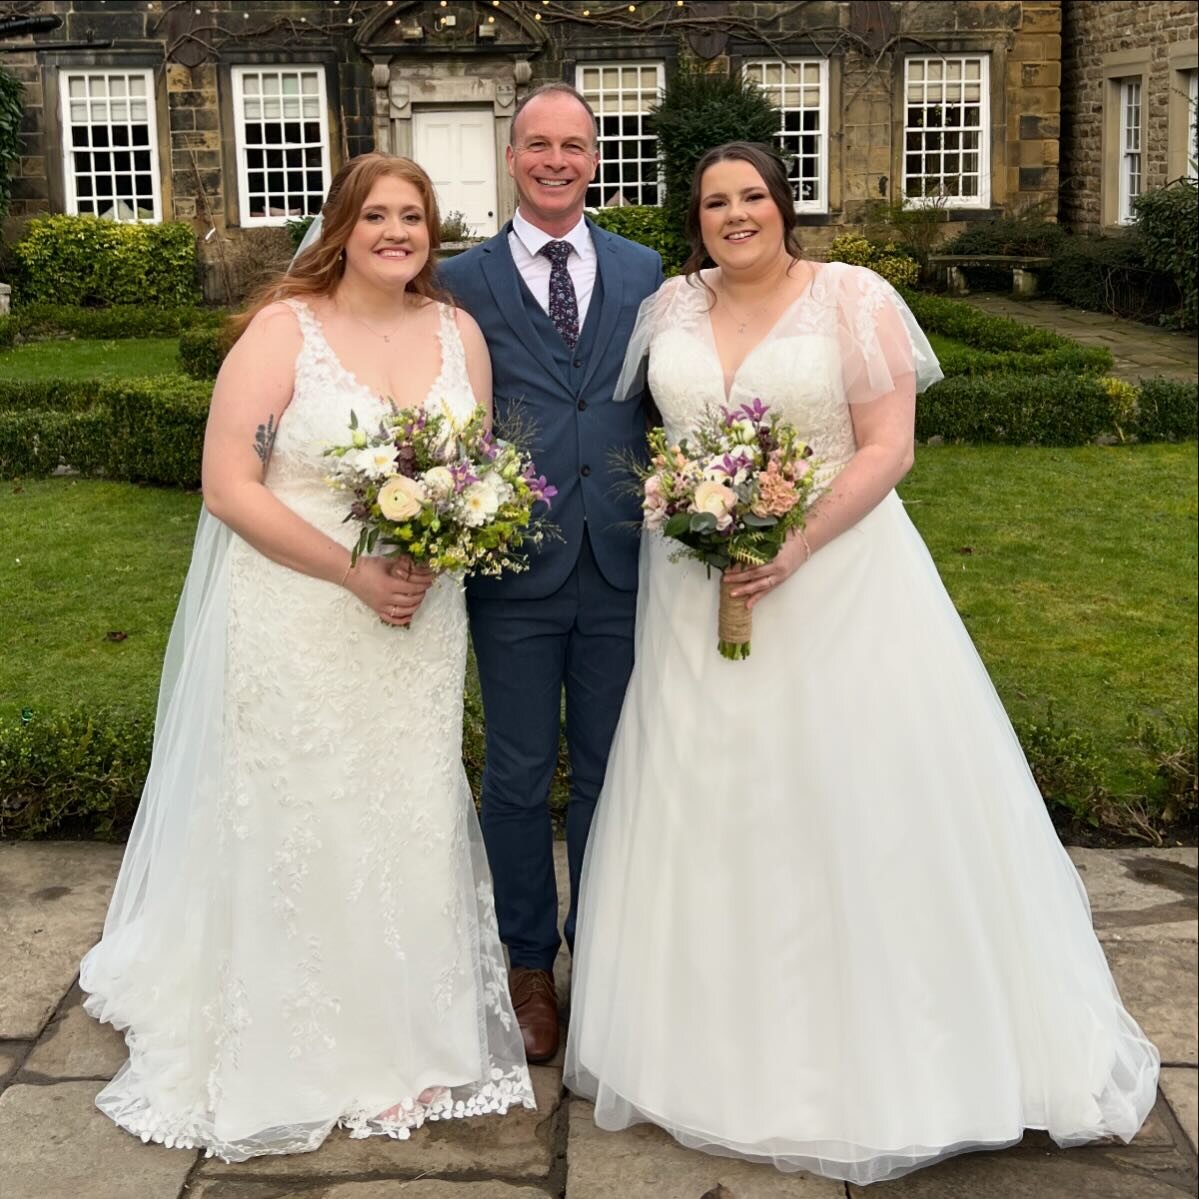 Congratulations to the new Mrs &amp; Mrs Mackay-Tuffs who had their wonderful wedding at Whitley Hall Hotel on Sunday. 

Amelia &amp; Meg had a beautiful wedding ceremony with readings from their mums, personal vows &amp; promises &amp; an exchange o